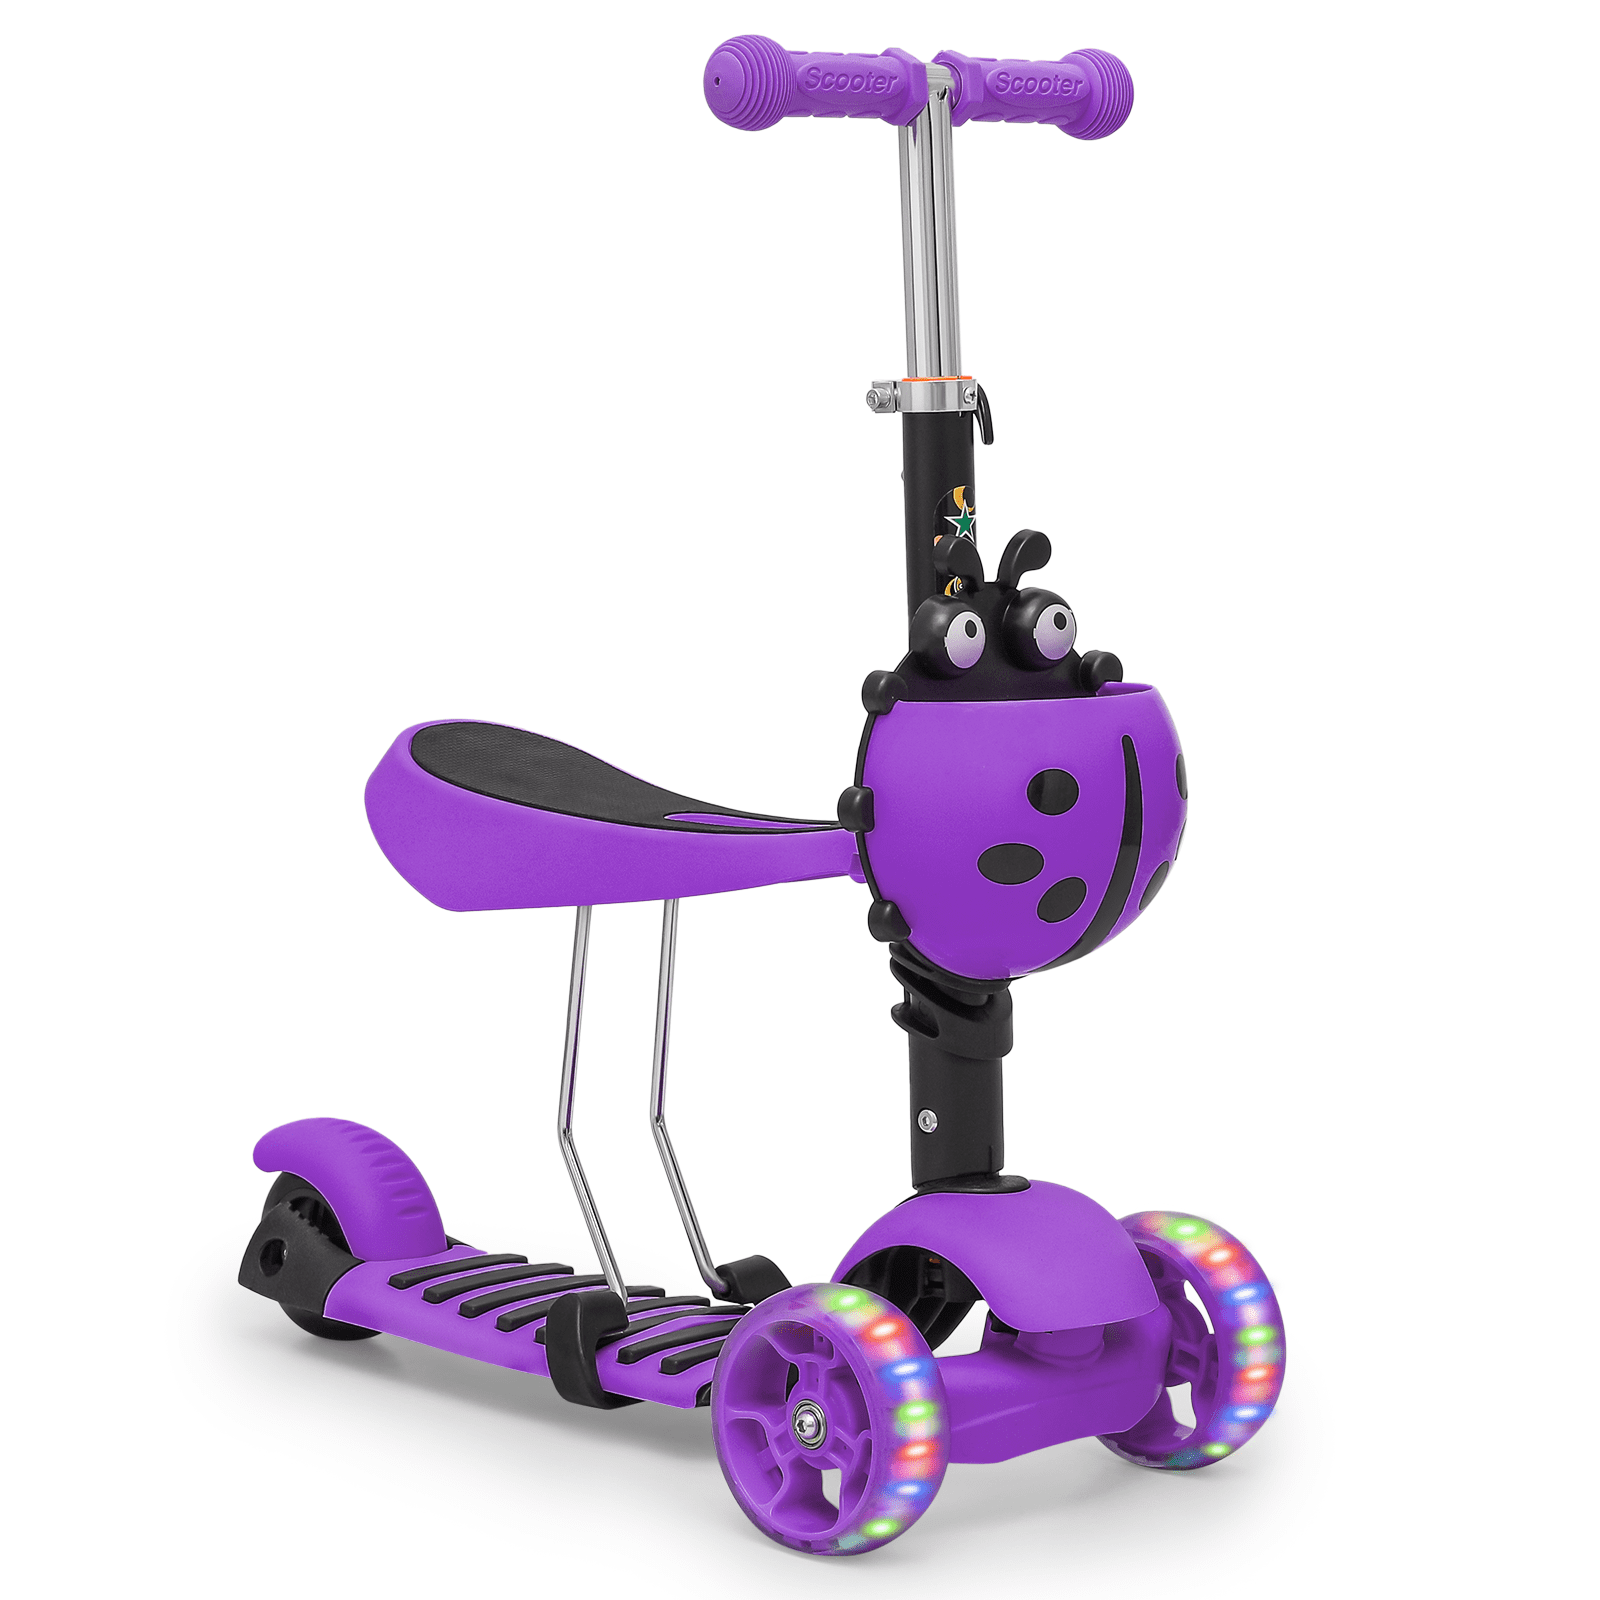 MADOG Kids Scooter, Kick Scooter with Removable Seat, Adjustable